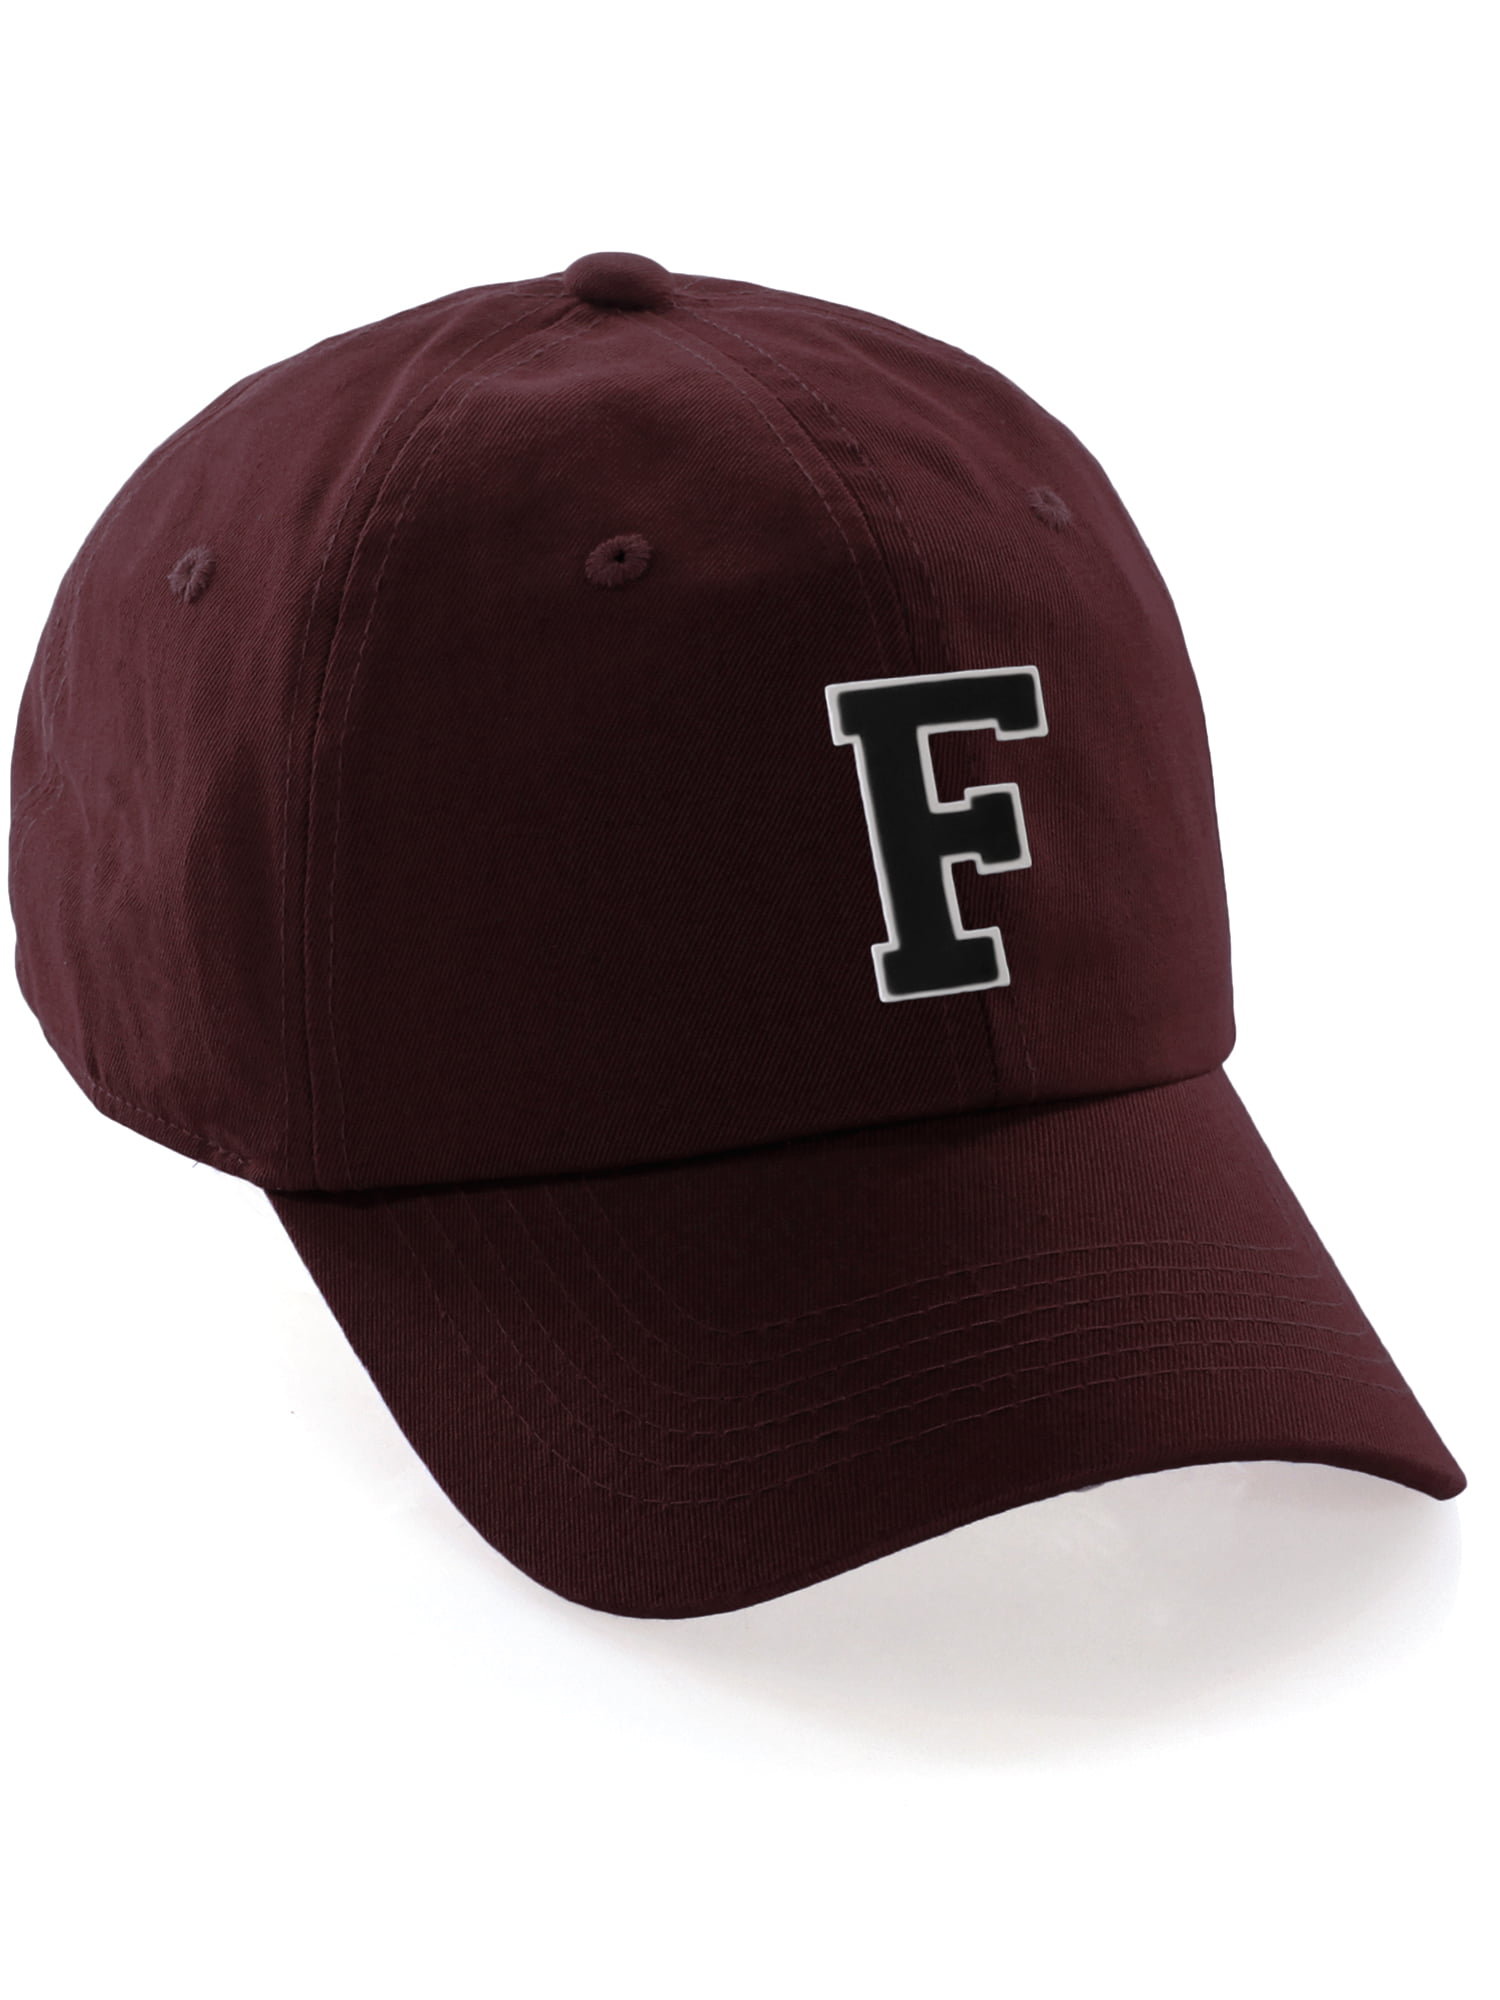 FSBN Baseball Cap red printed lettering casual look Accessories Caps Baseball Caps 